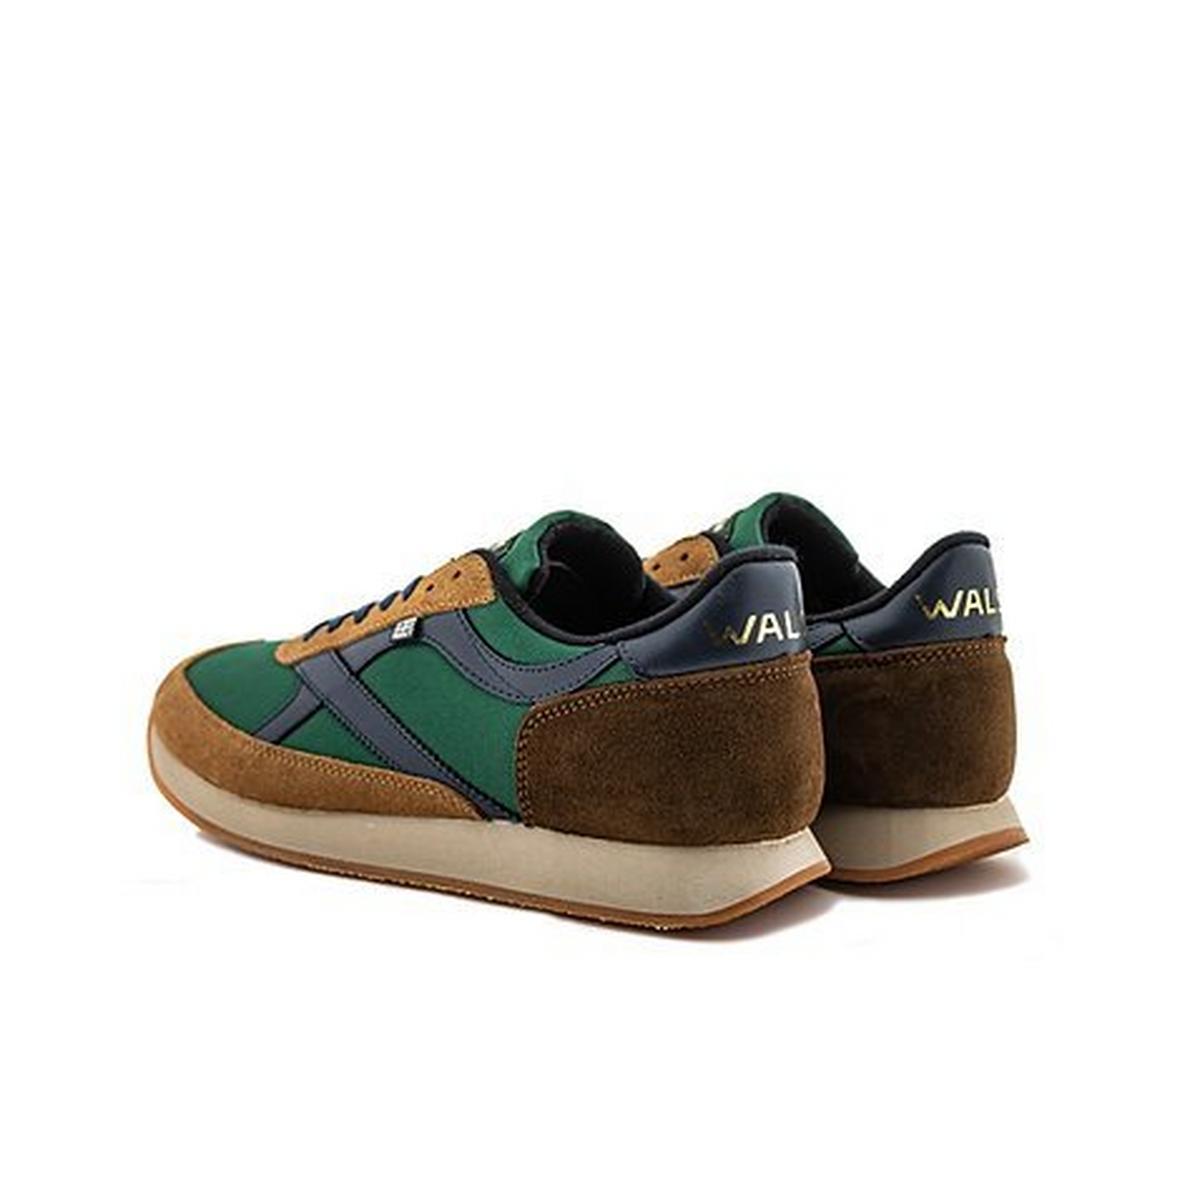 Walsh Men's Whirlwind Trainers - Navy/Brown/Green